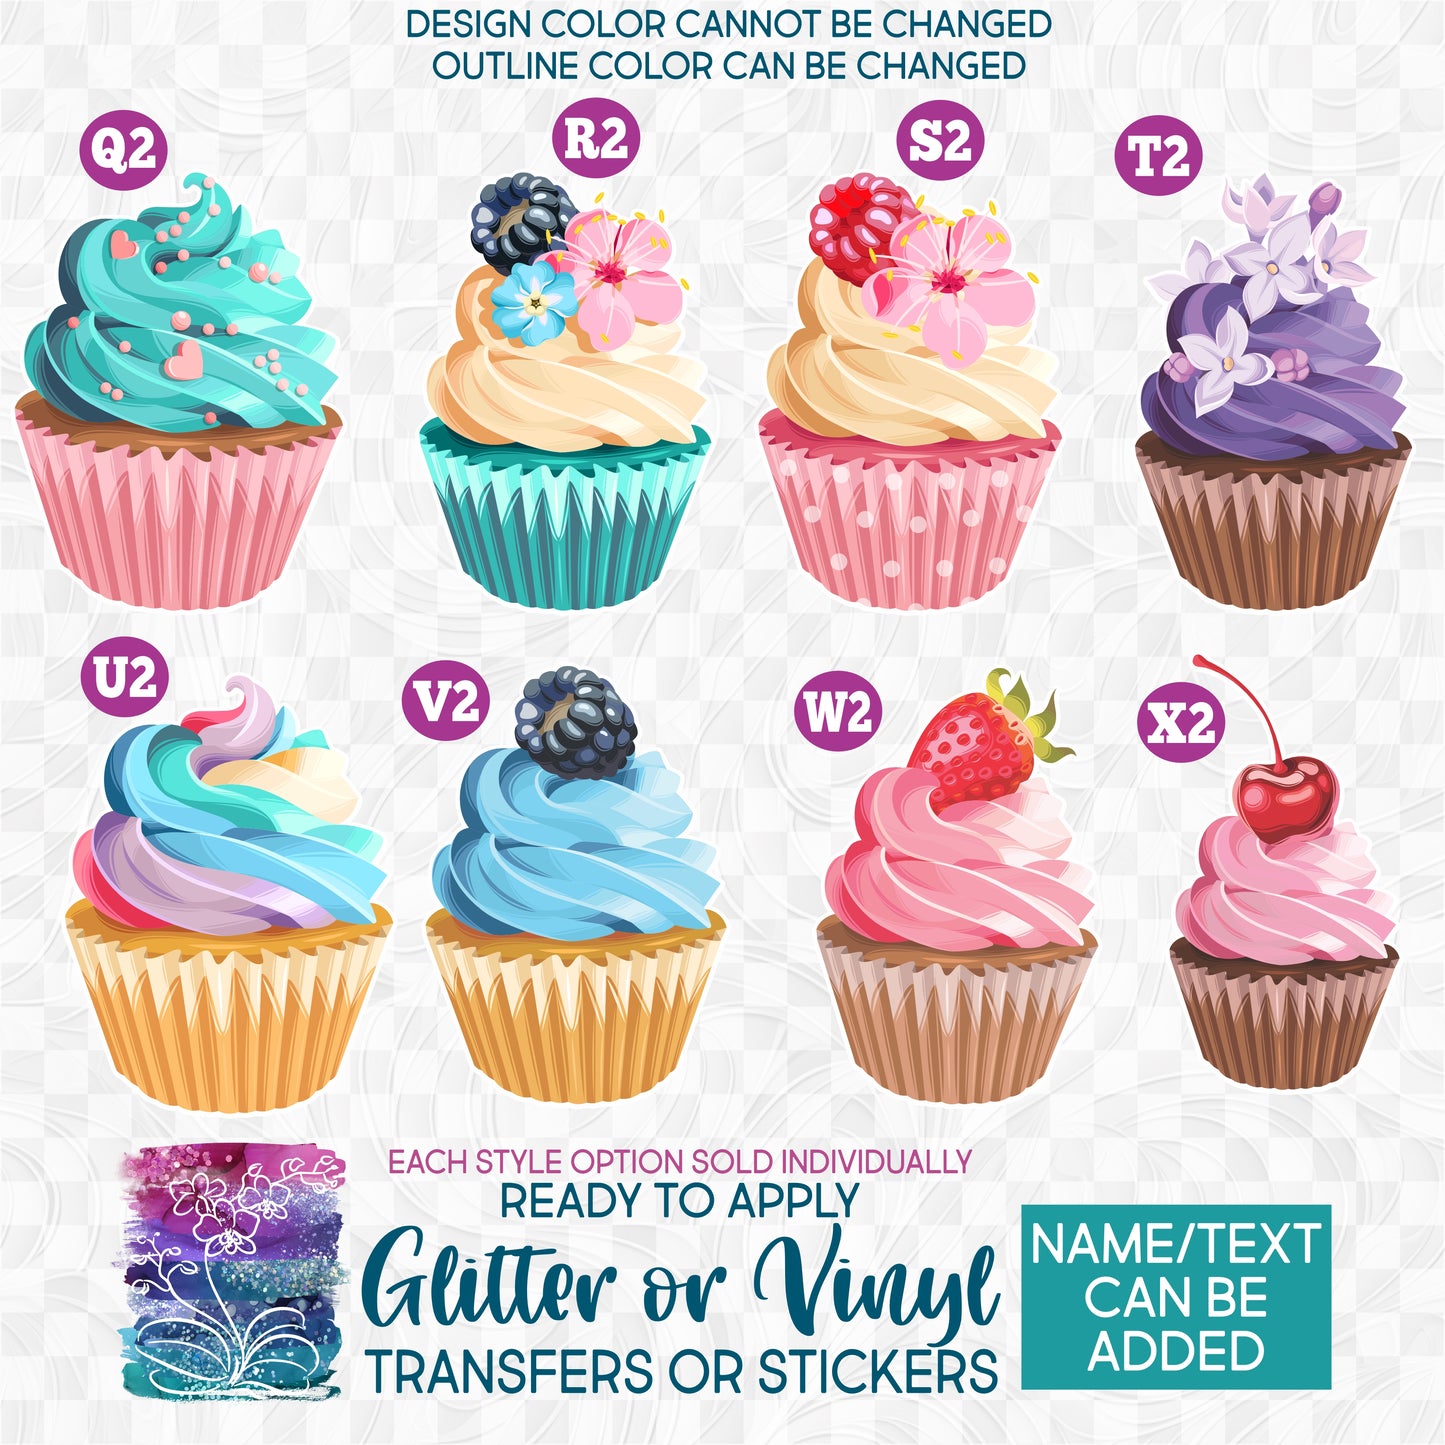 SBS-275-2 Cute Cupcake Cupcakes Made-to-Order Iron-On Transfer or Sticker